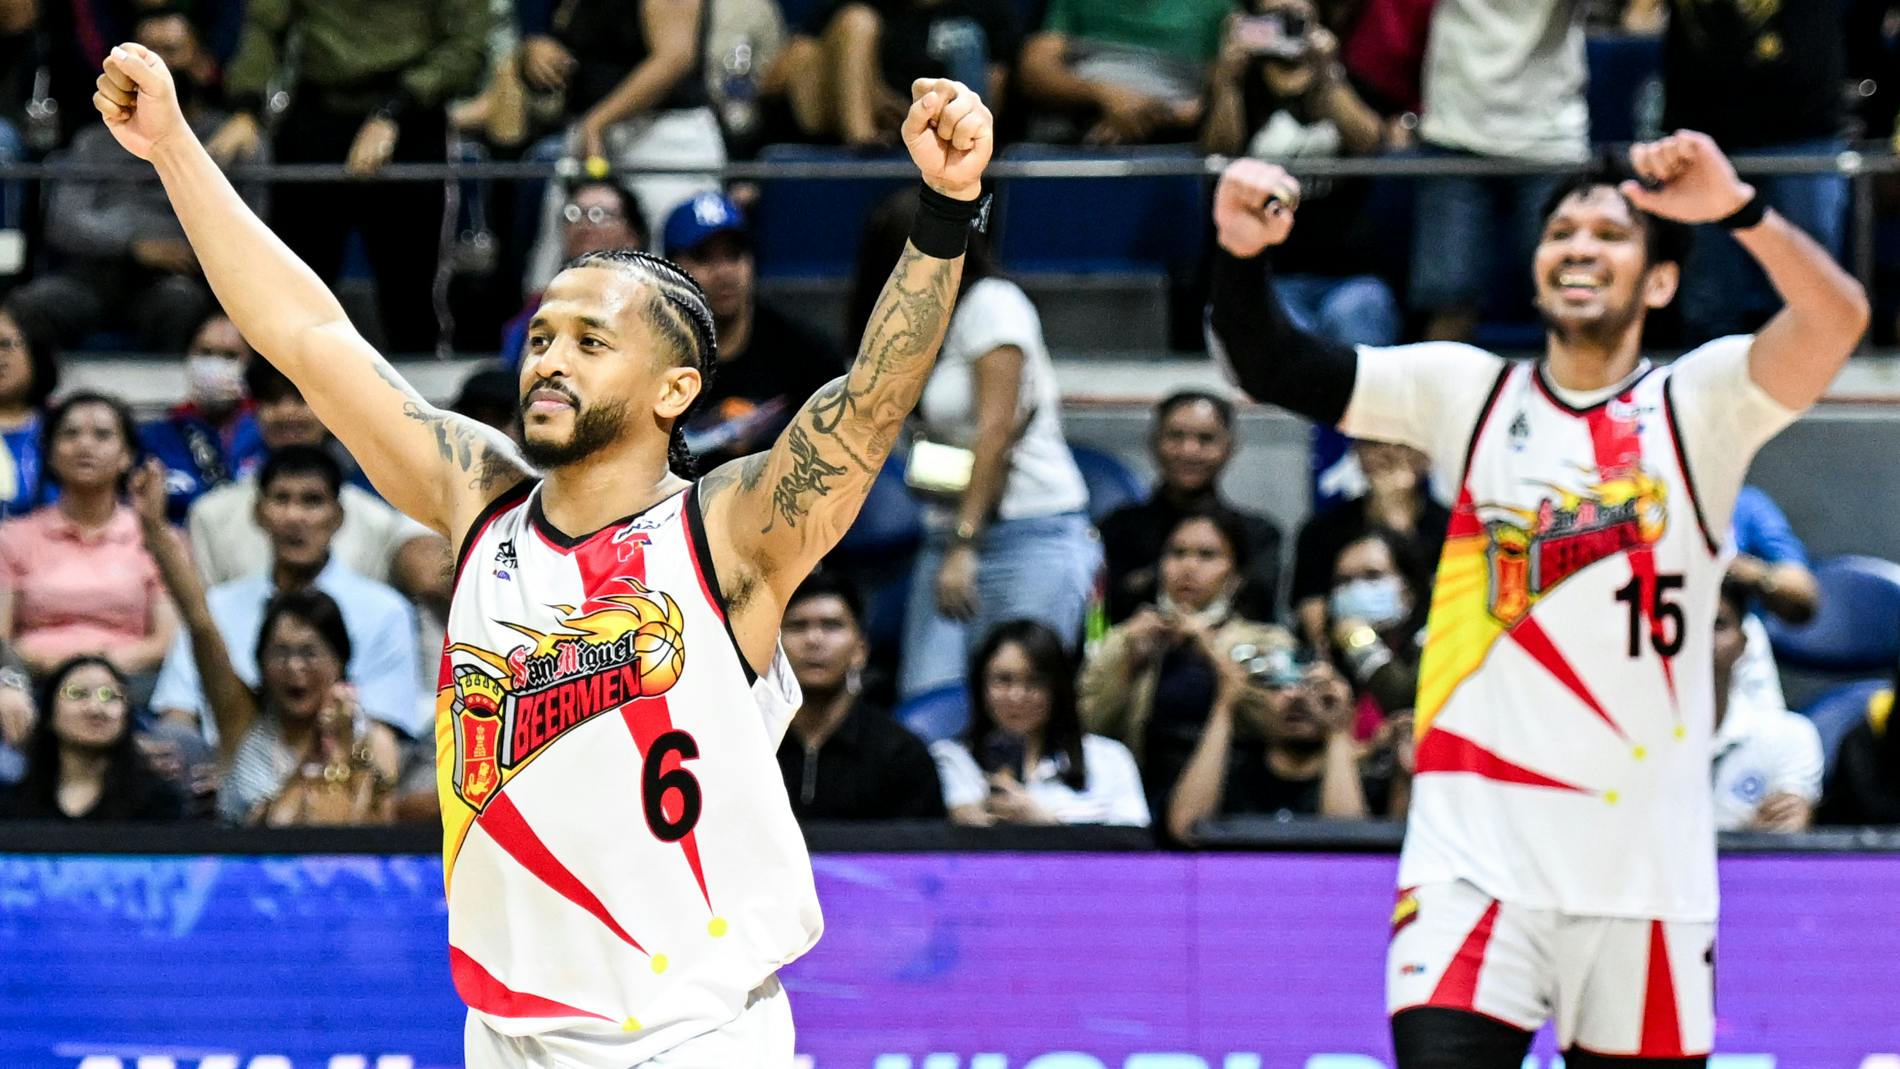 PBA: After winning his 10th championship, San Miguel star Chris Ross doesn’t plan on stopping anytime soon